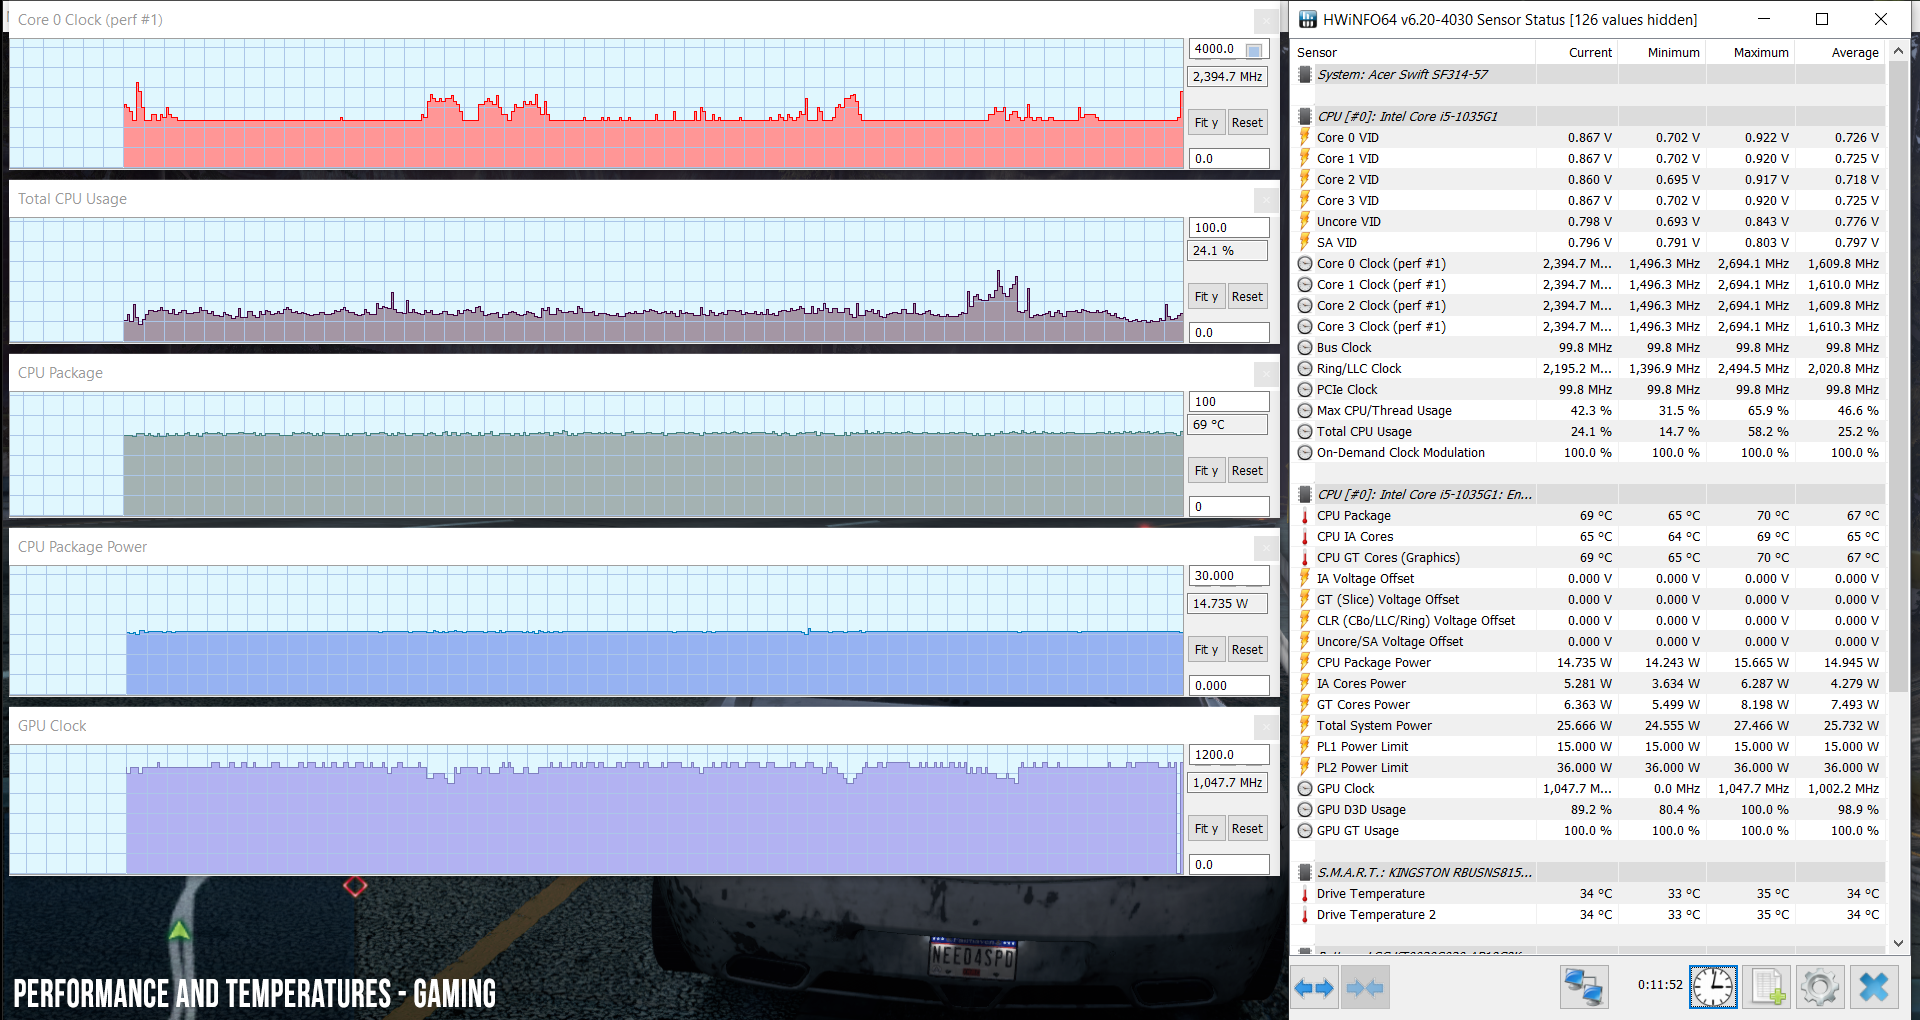 perf temps gaming nfs